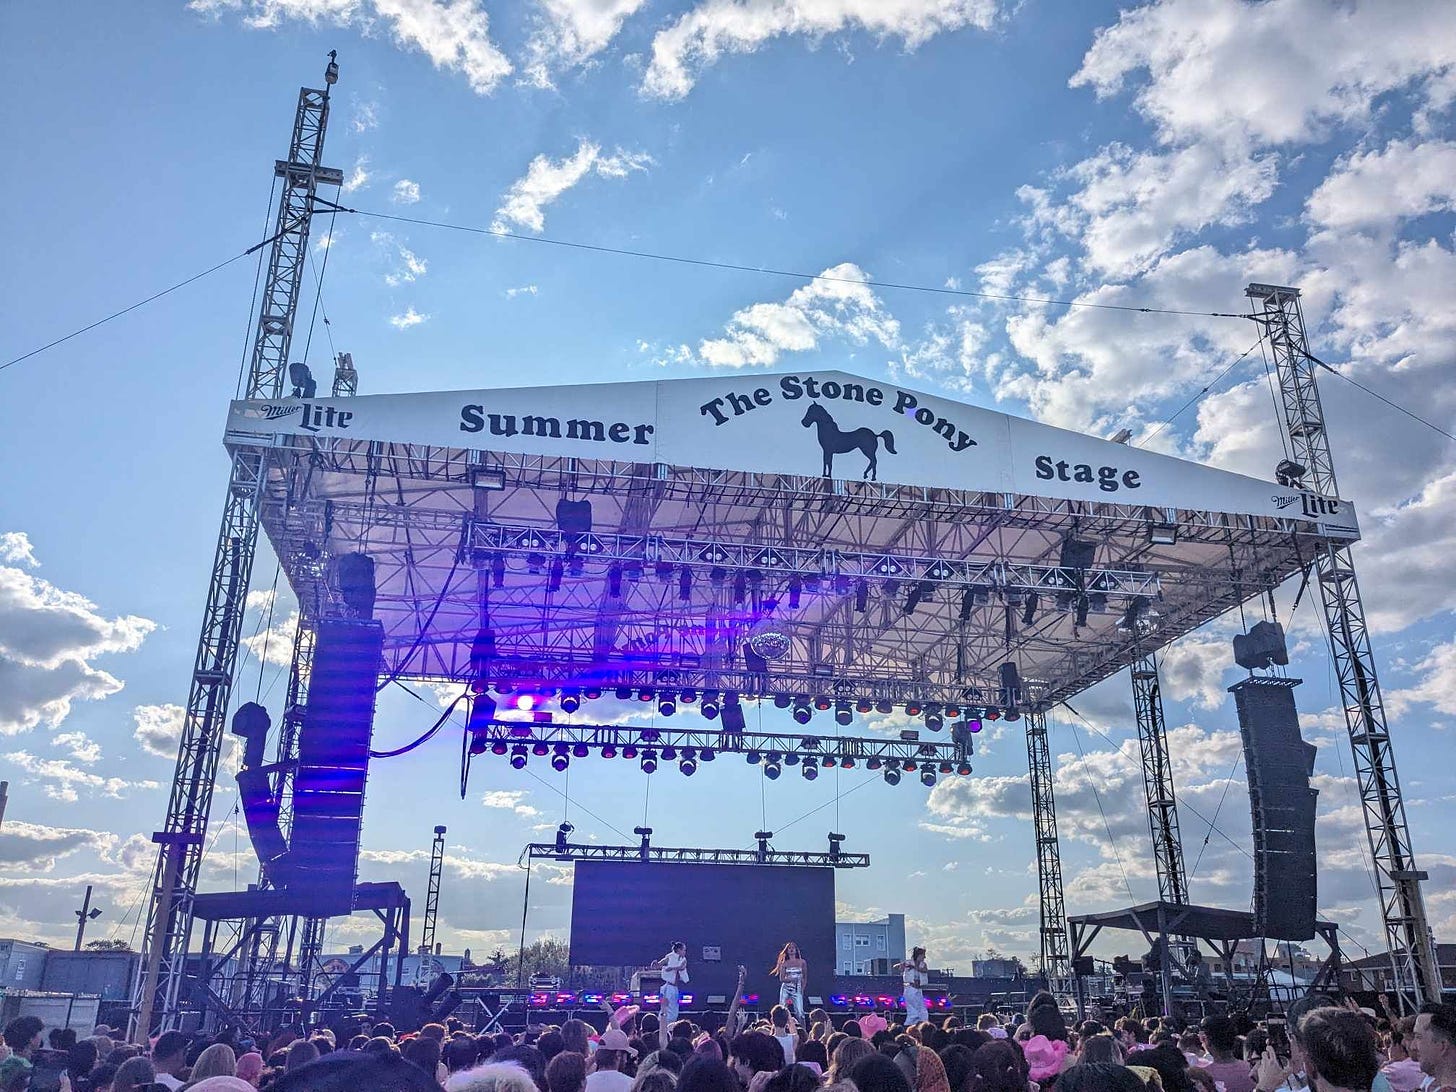 Large stage with a sign that says "The Stone Pony Summer Stage." A white female in silver is standing on the stage with 2 dancers in front of a crowd